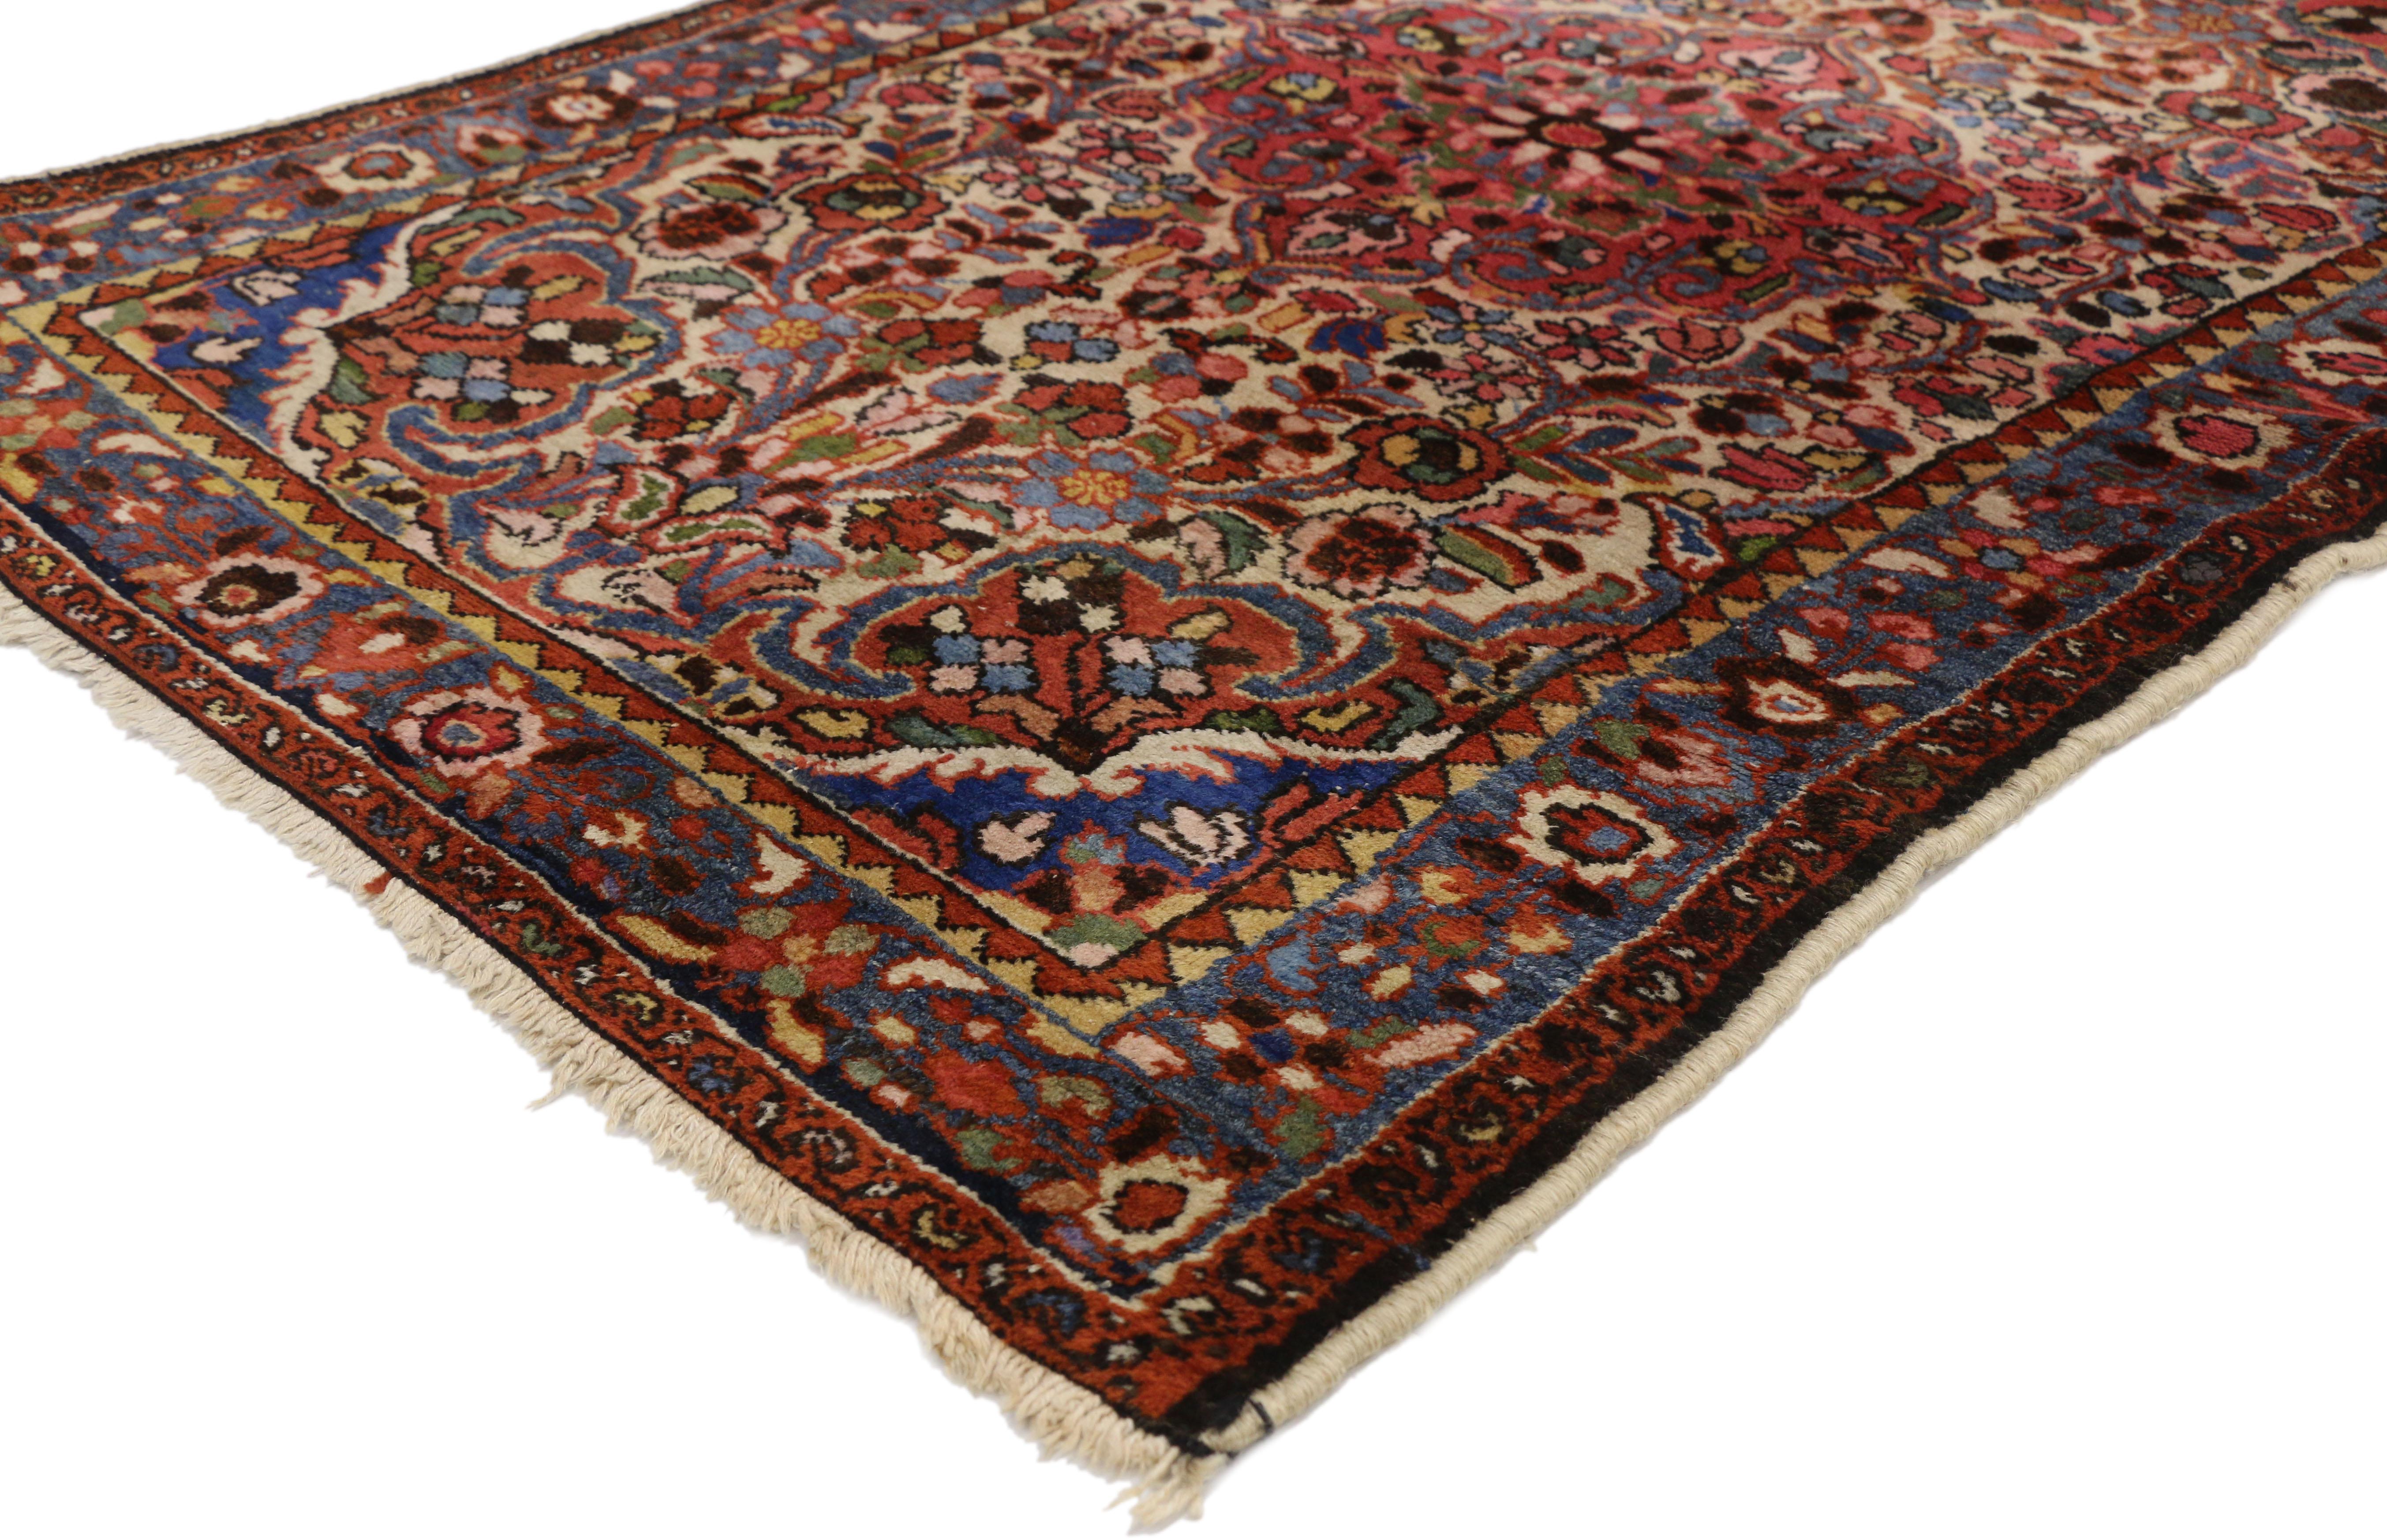 70975, antique Persian Hamadan Accent rug with traditional style. This hand-knotted wool antique Persian Hamadan Accent rug features a medallion and dense floral pattern in a burst of vibrant colors. The field is set with a round lobed central